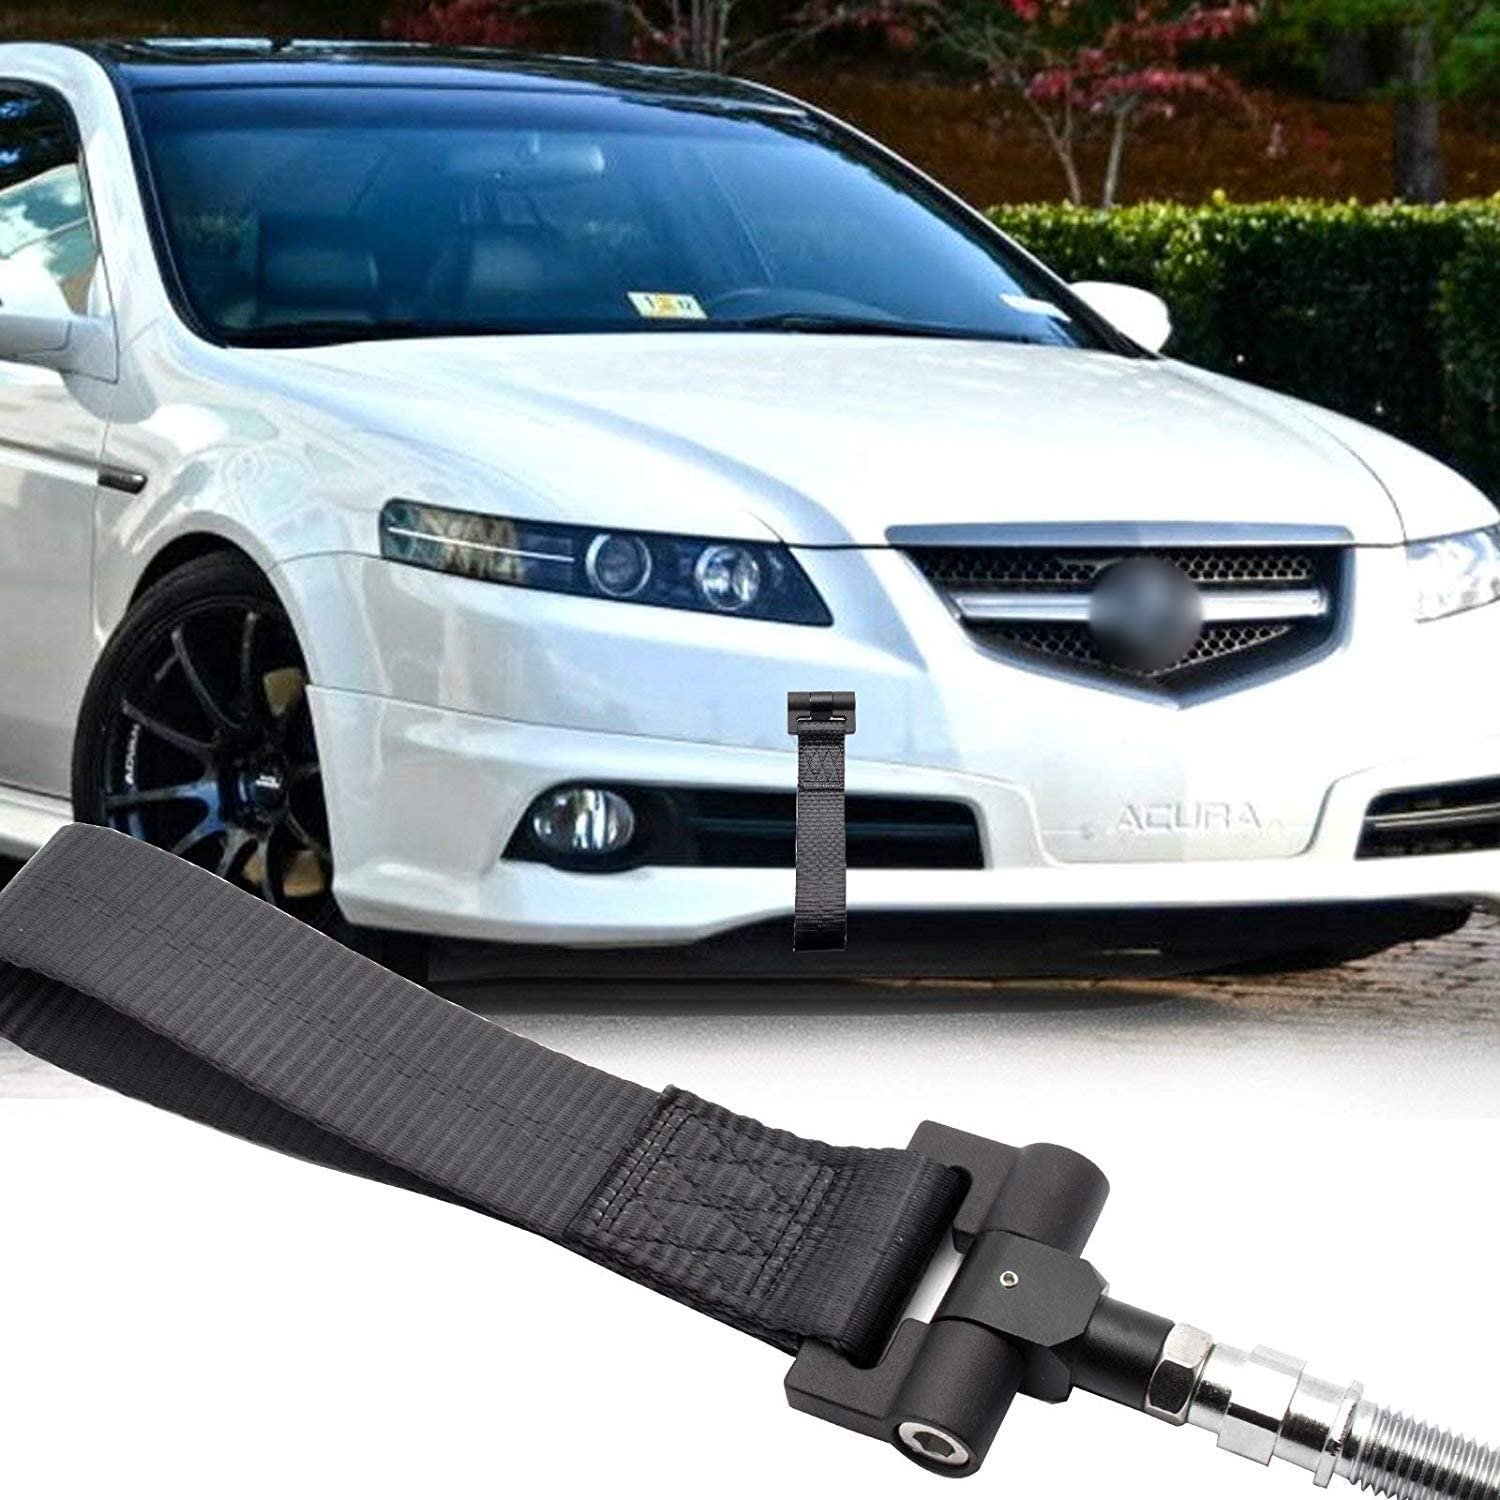 Xotic Tech Black JDM Sporty Tow Hook Adapter with Towing Strap for Honda Fit Acura TL (Black)